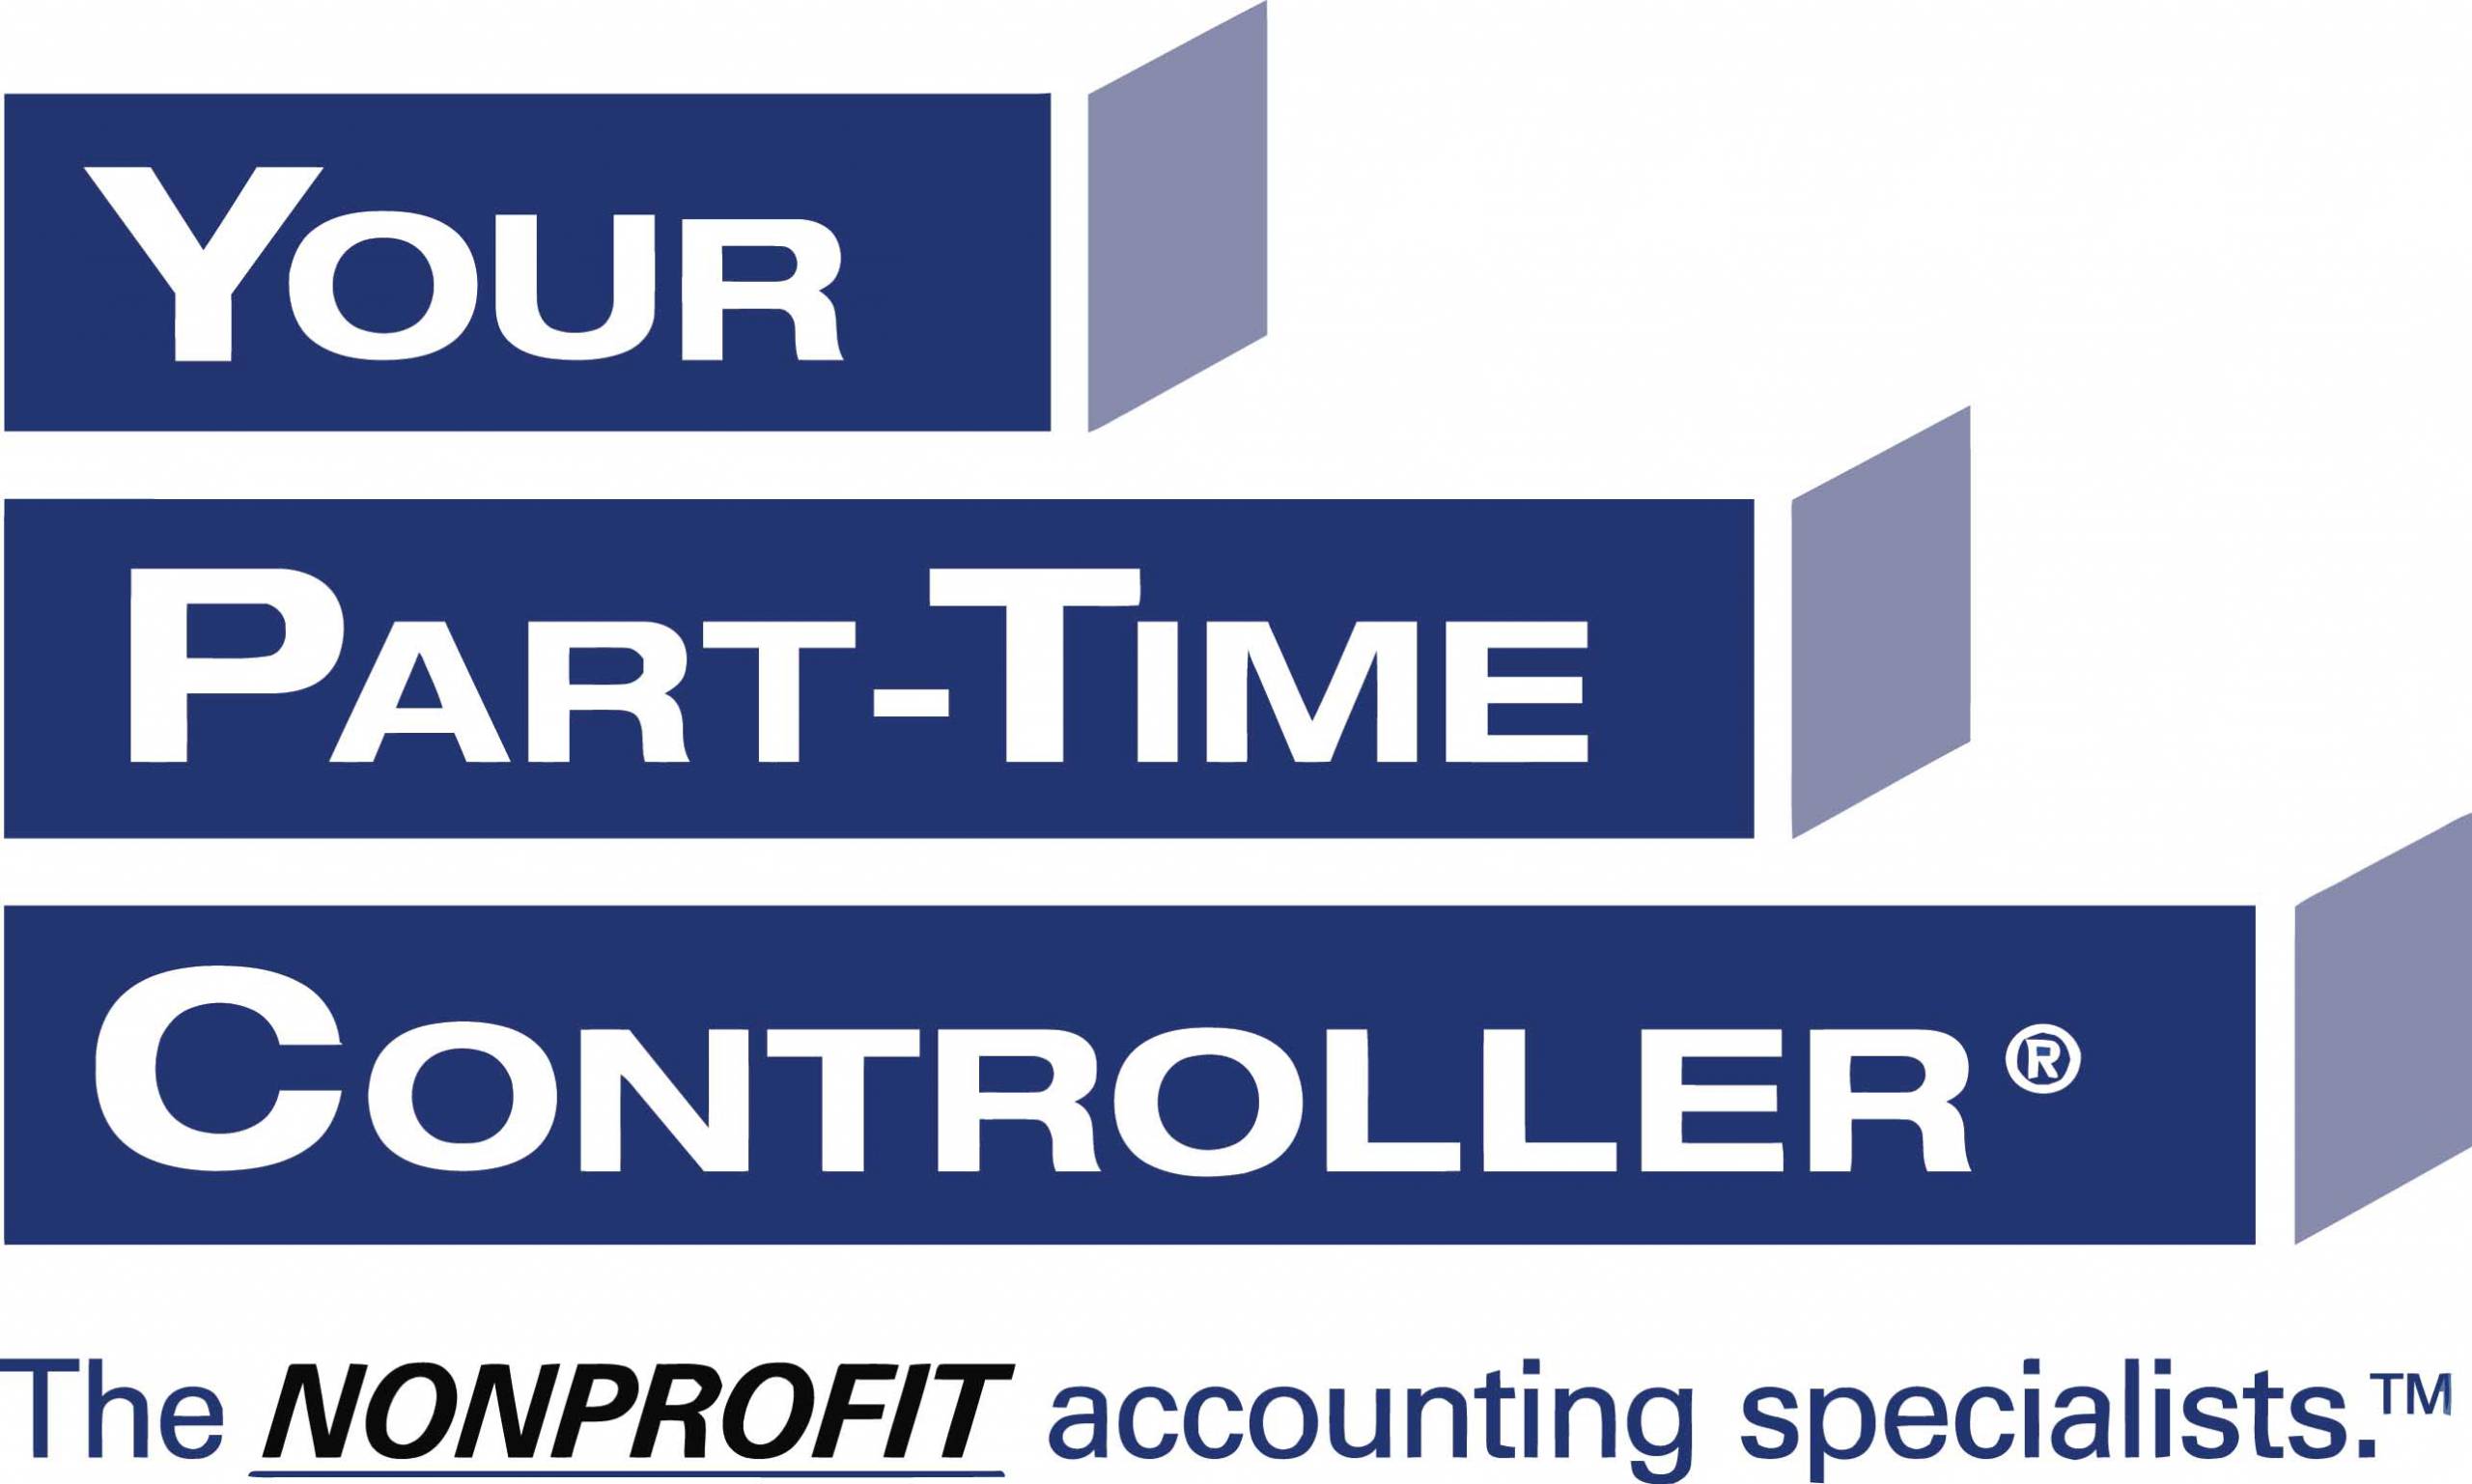 Link to Your Part time Controller